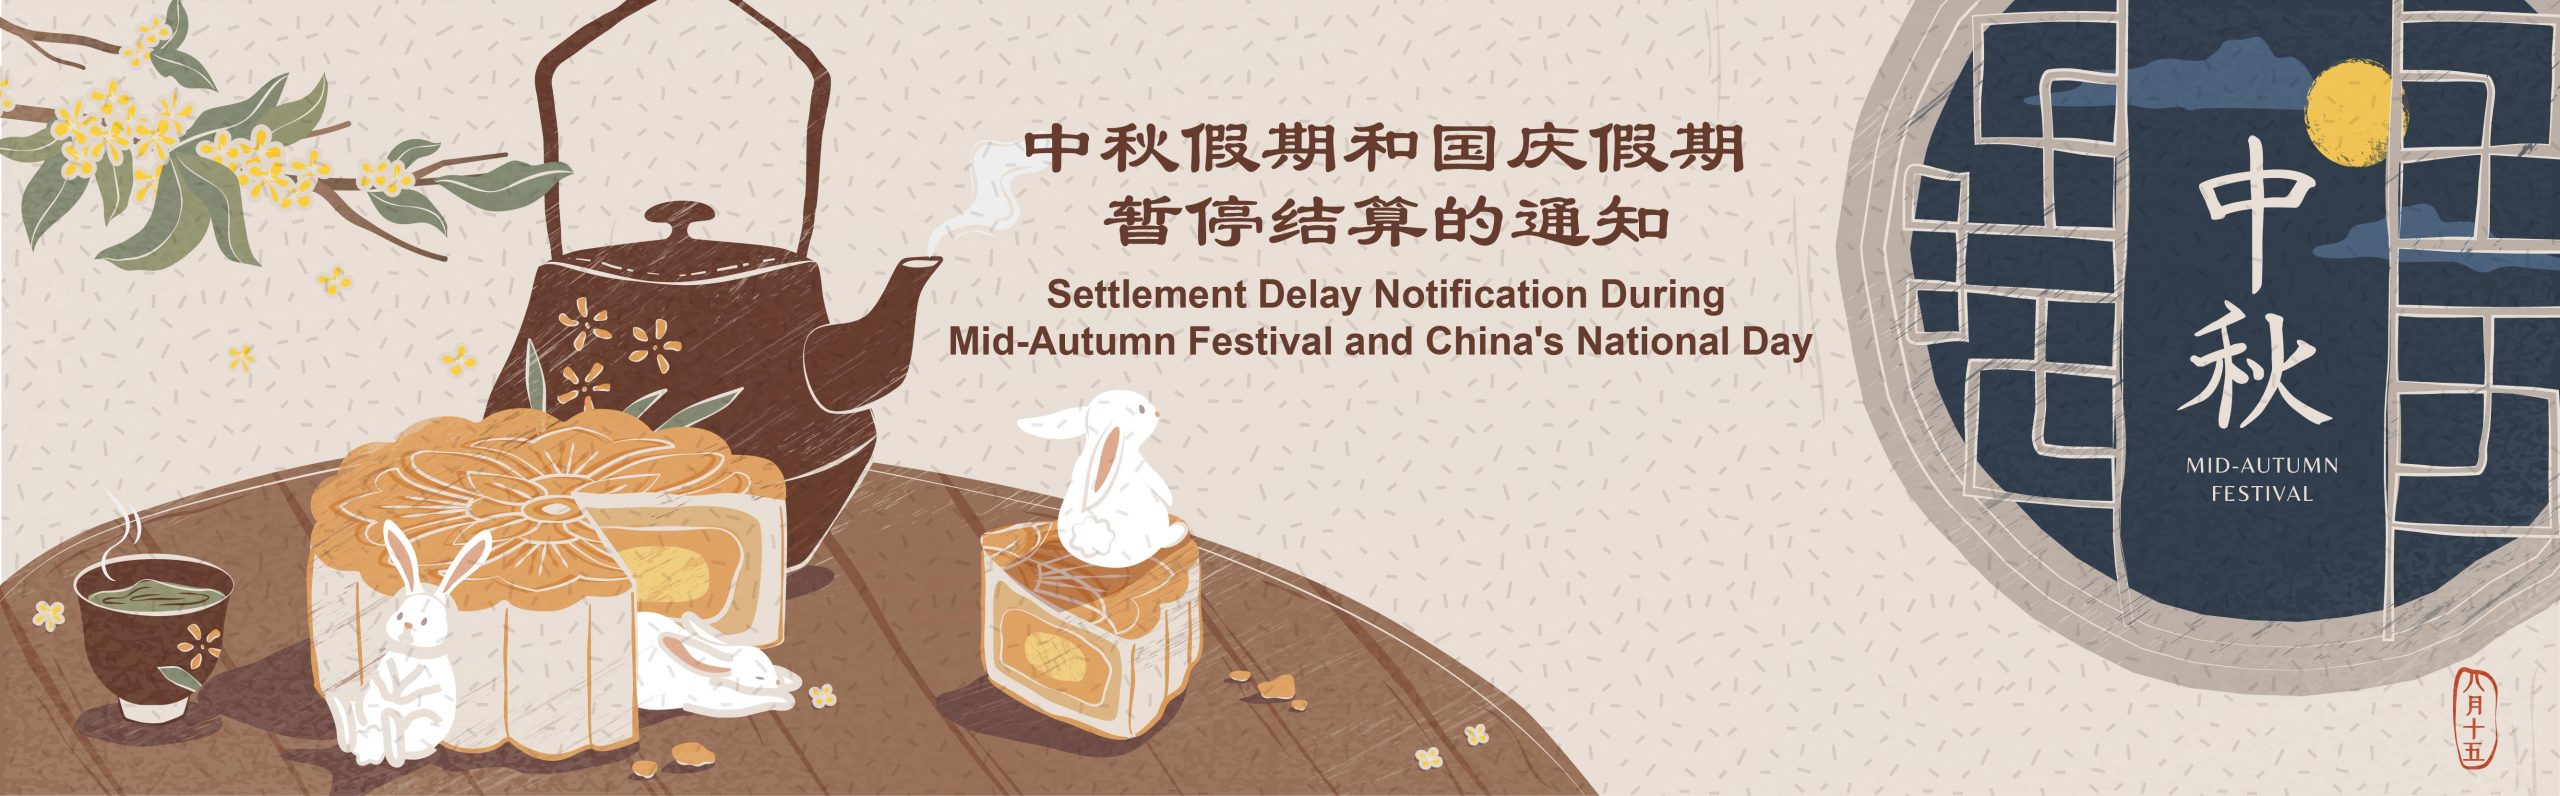 Settlement Delay Notification During Mid- Autumn Festival and China’s National Day 关于中秋假期和国庆假期暂停结算的通知